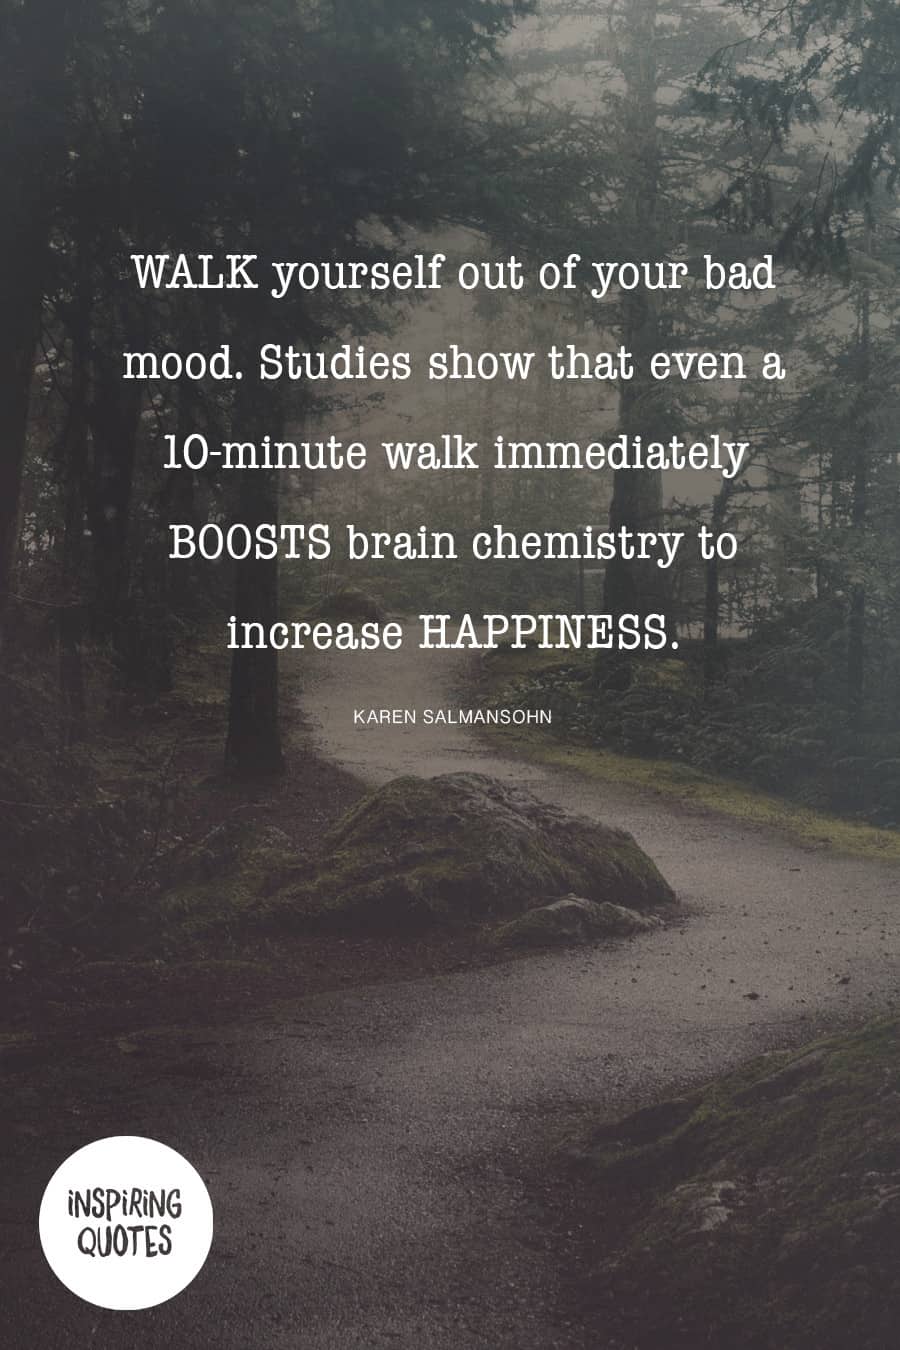 Walk yourself out of your bad mood. Studies show that even a 10-minute walk immediately boosts brain chemistry to increase happiness. #choosejoy #happiness *Love this entire post